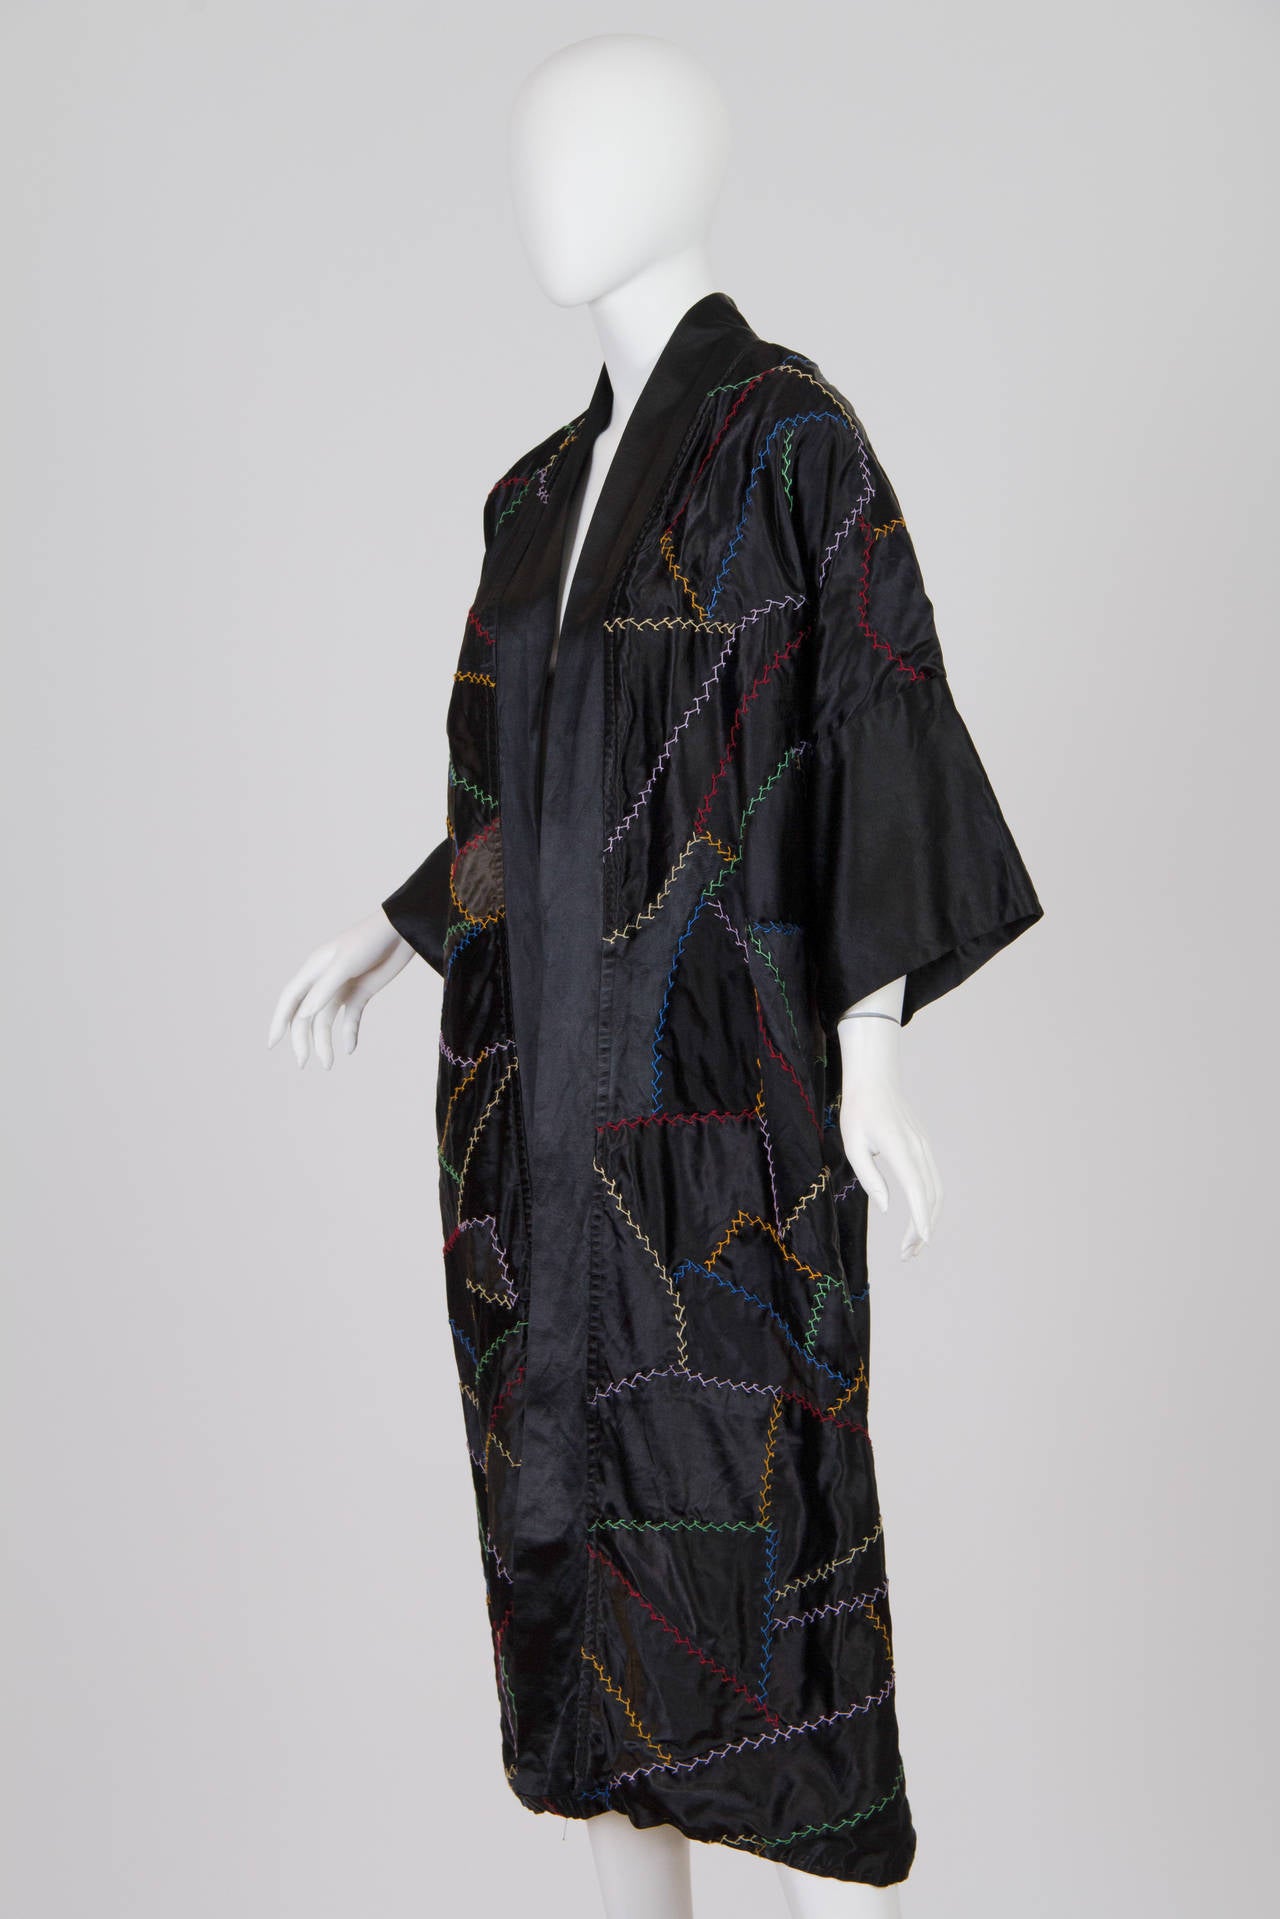 We have never seen a piece before from the 1920s in such phenomenal condition. The patchwork crazy quilt design may have been made of older textiles in its day but they are all in very strong and wearable condition. the lining is a fantastic strong